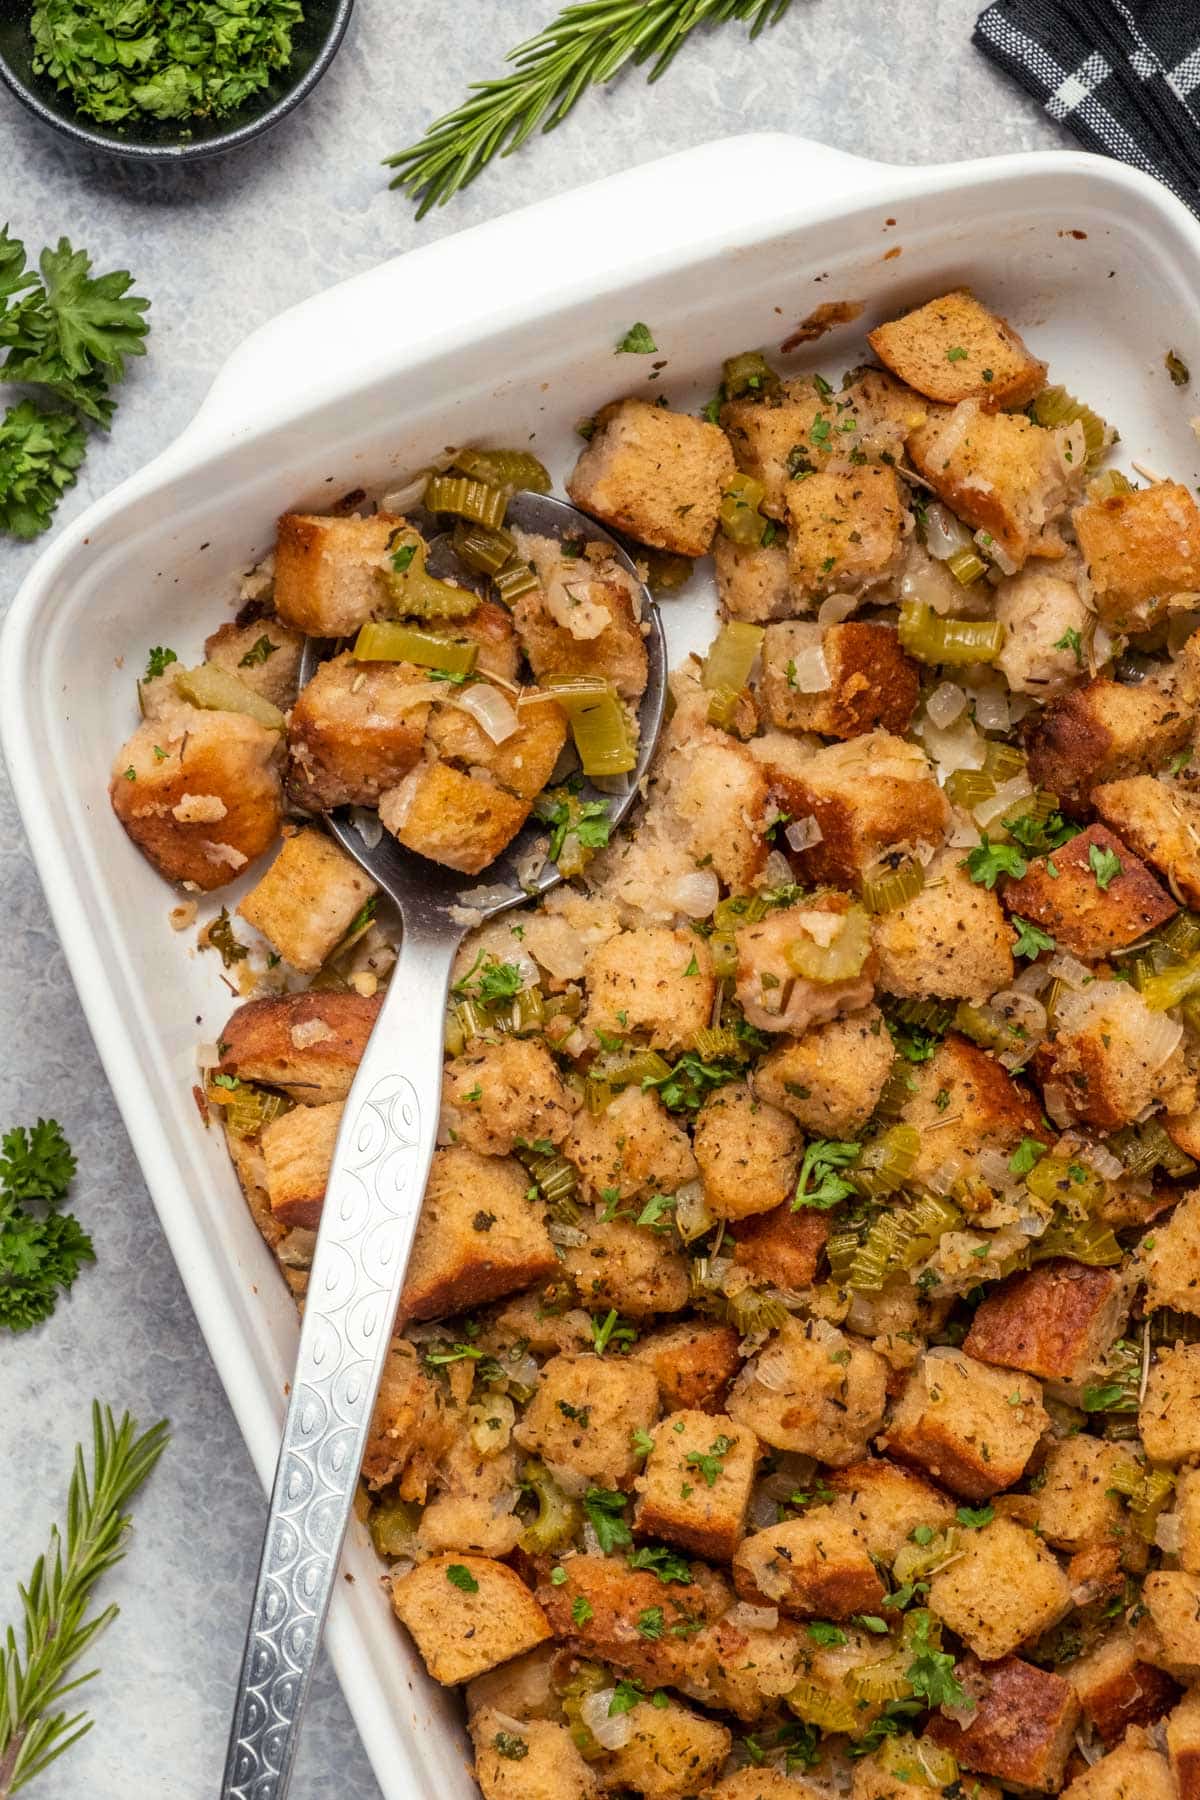 Vegan stuffing in a white dish with a serving spoon.